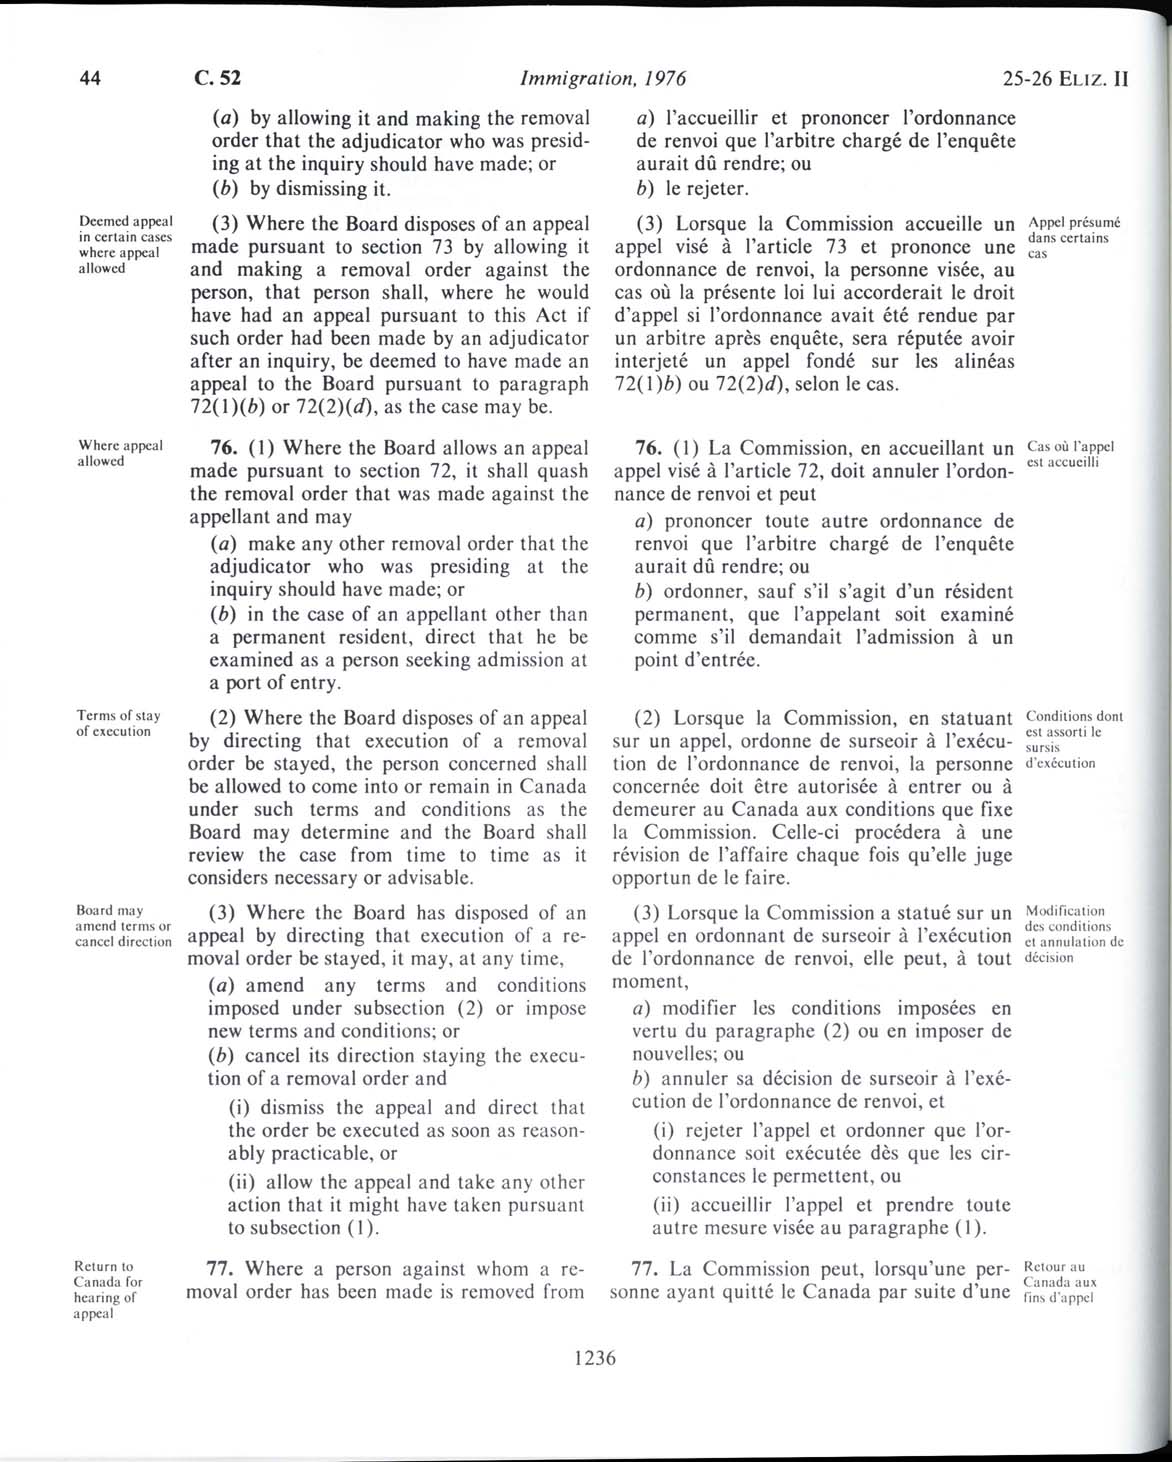 Page 1236 Immigration Act, 1976